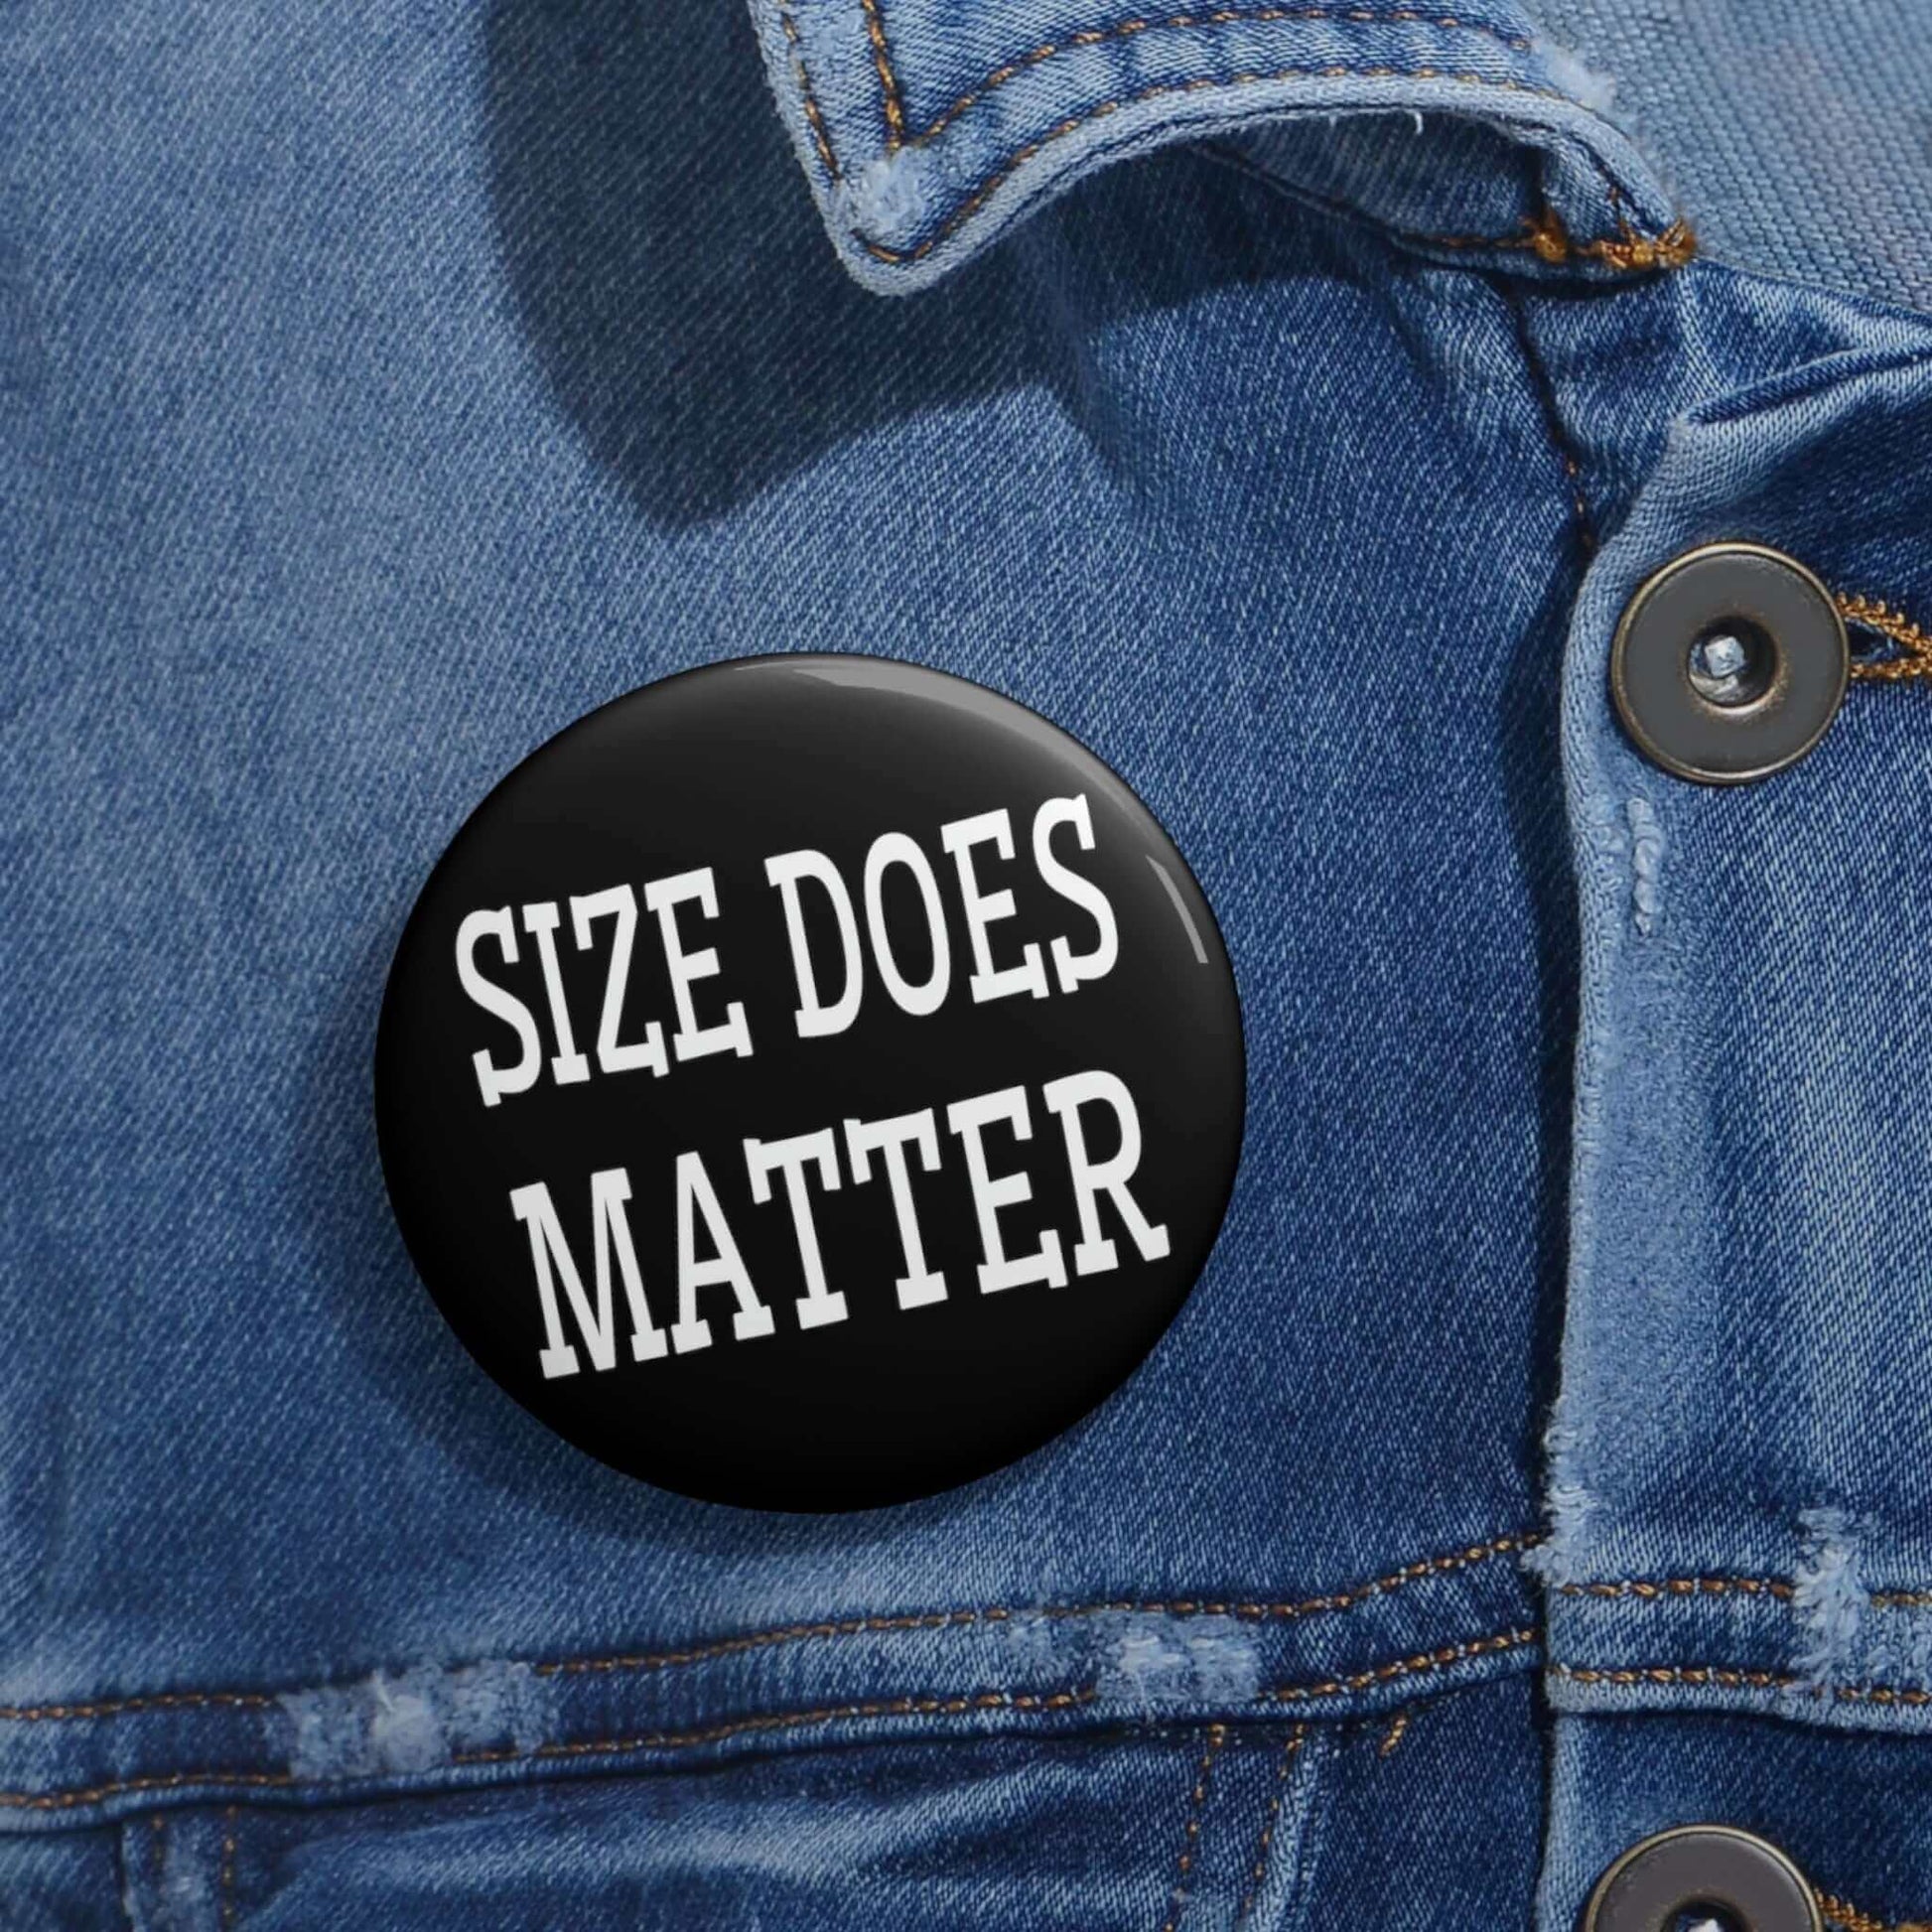 Pinback button that says size does matter.